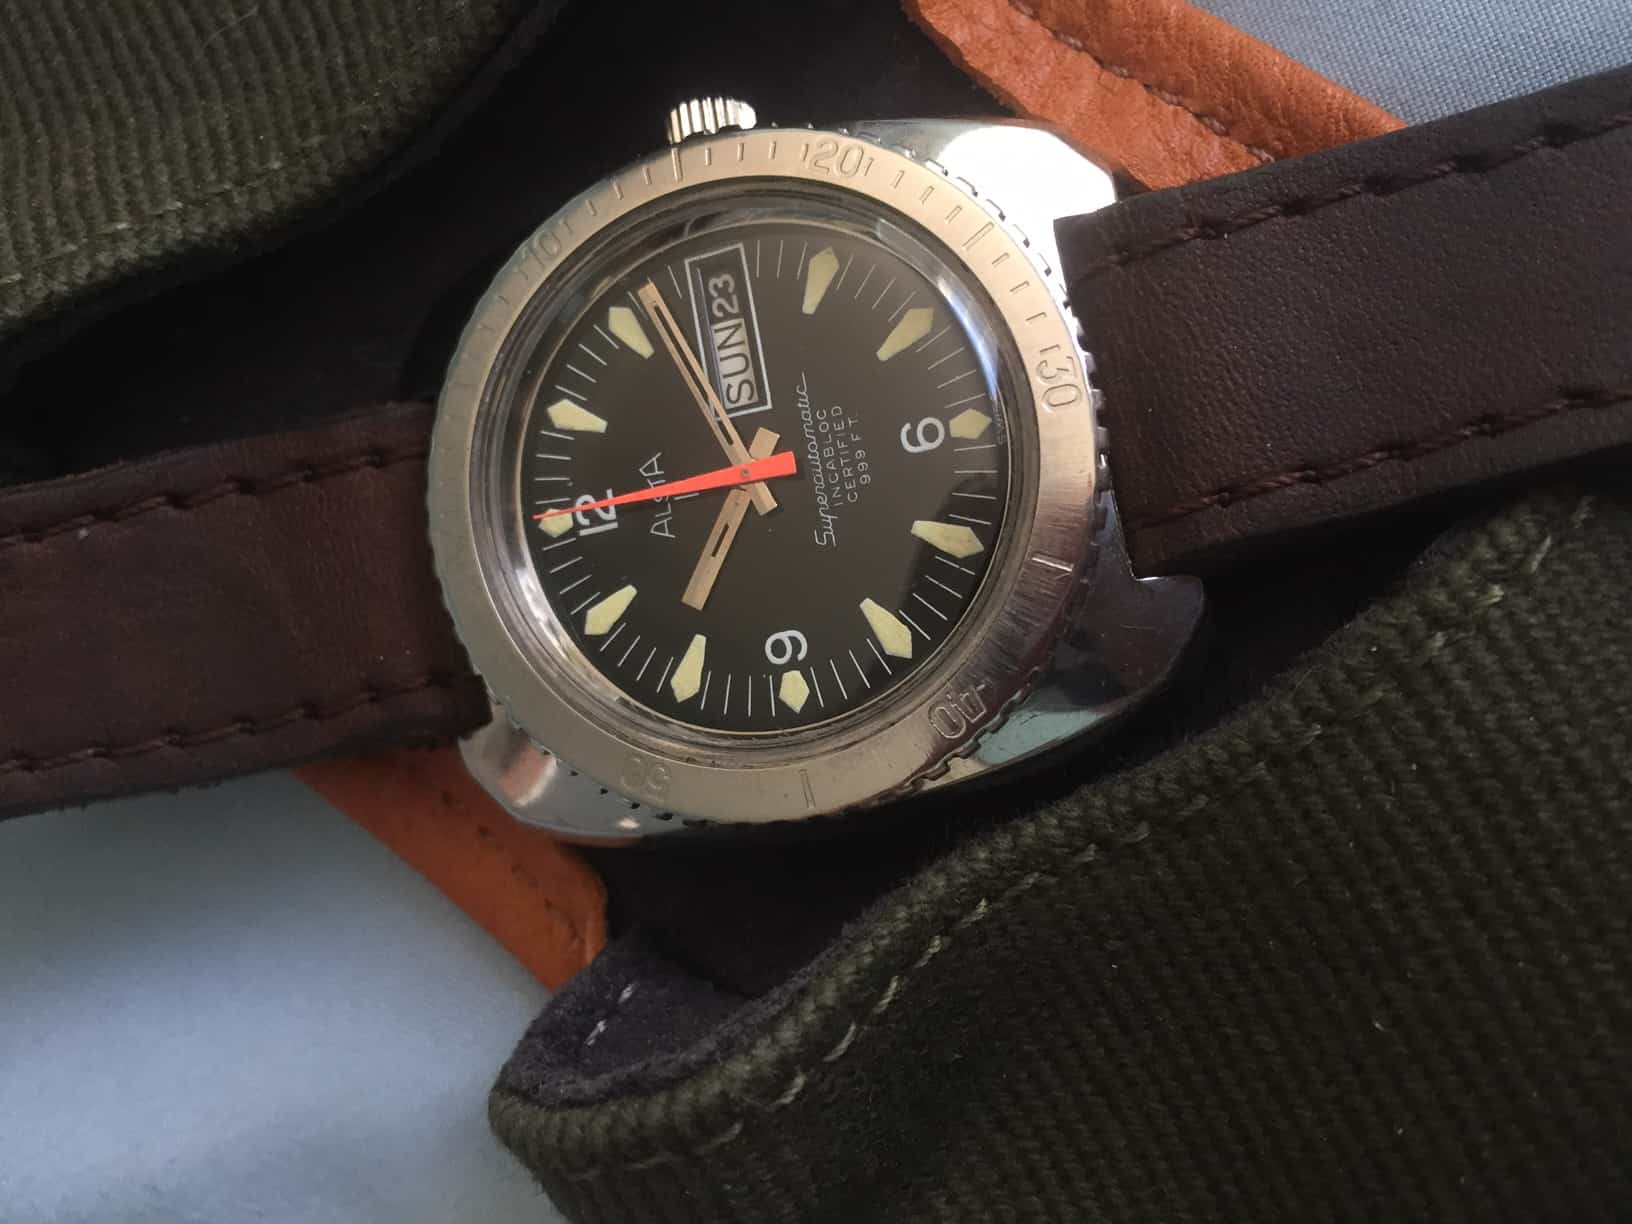 Affordable Vintage: Deep Dive with the Alsta Nautoscaph 